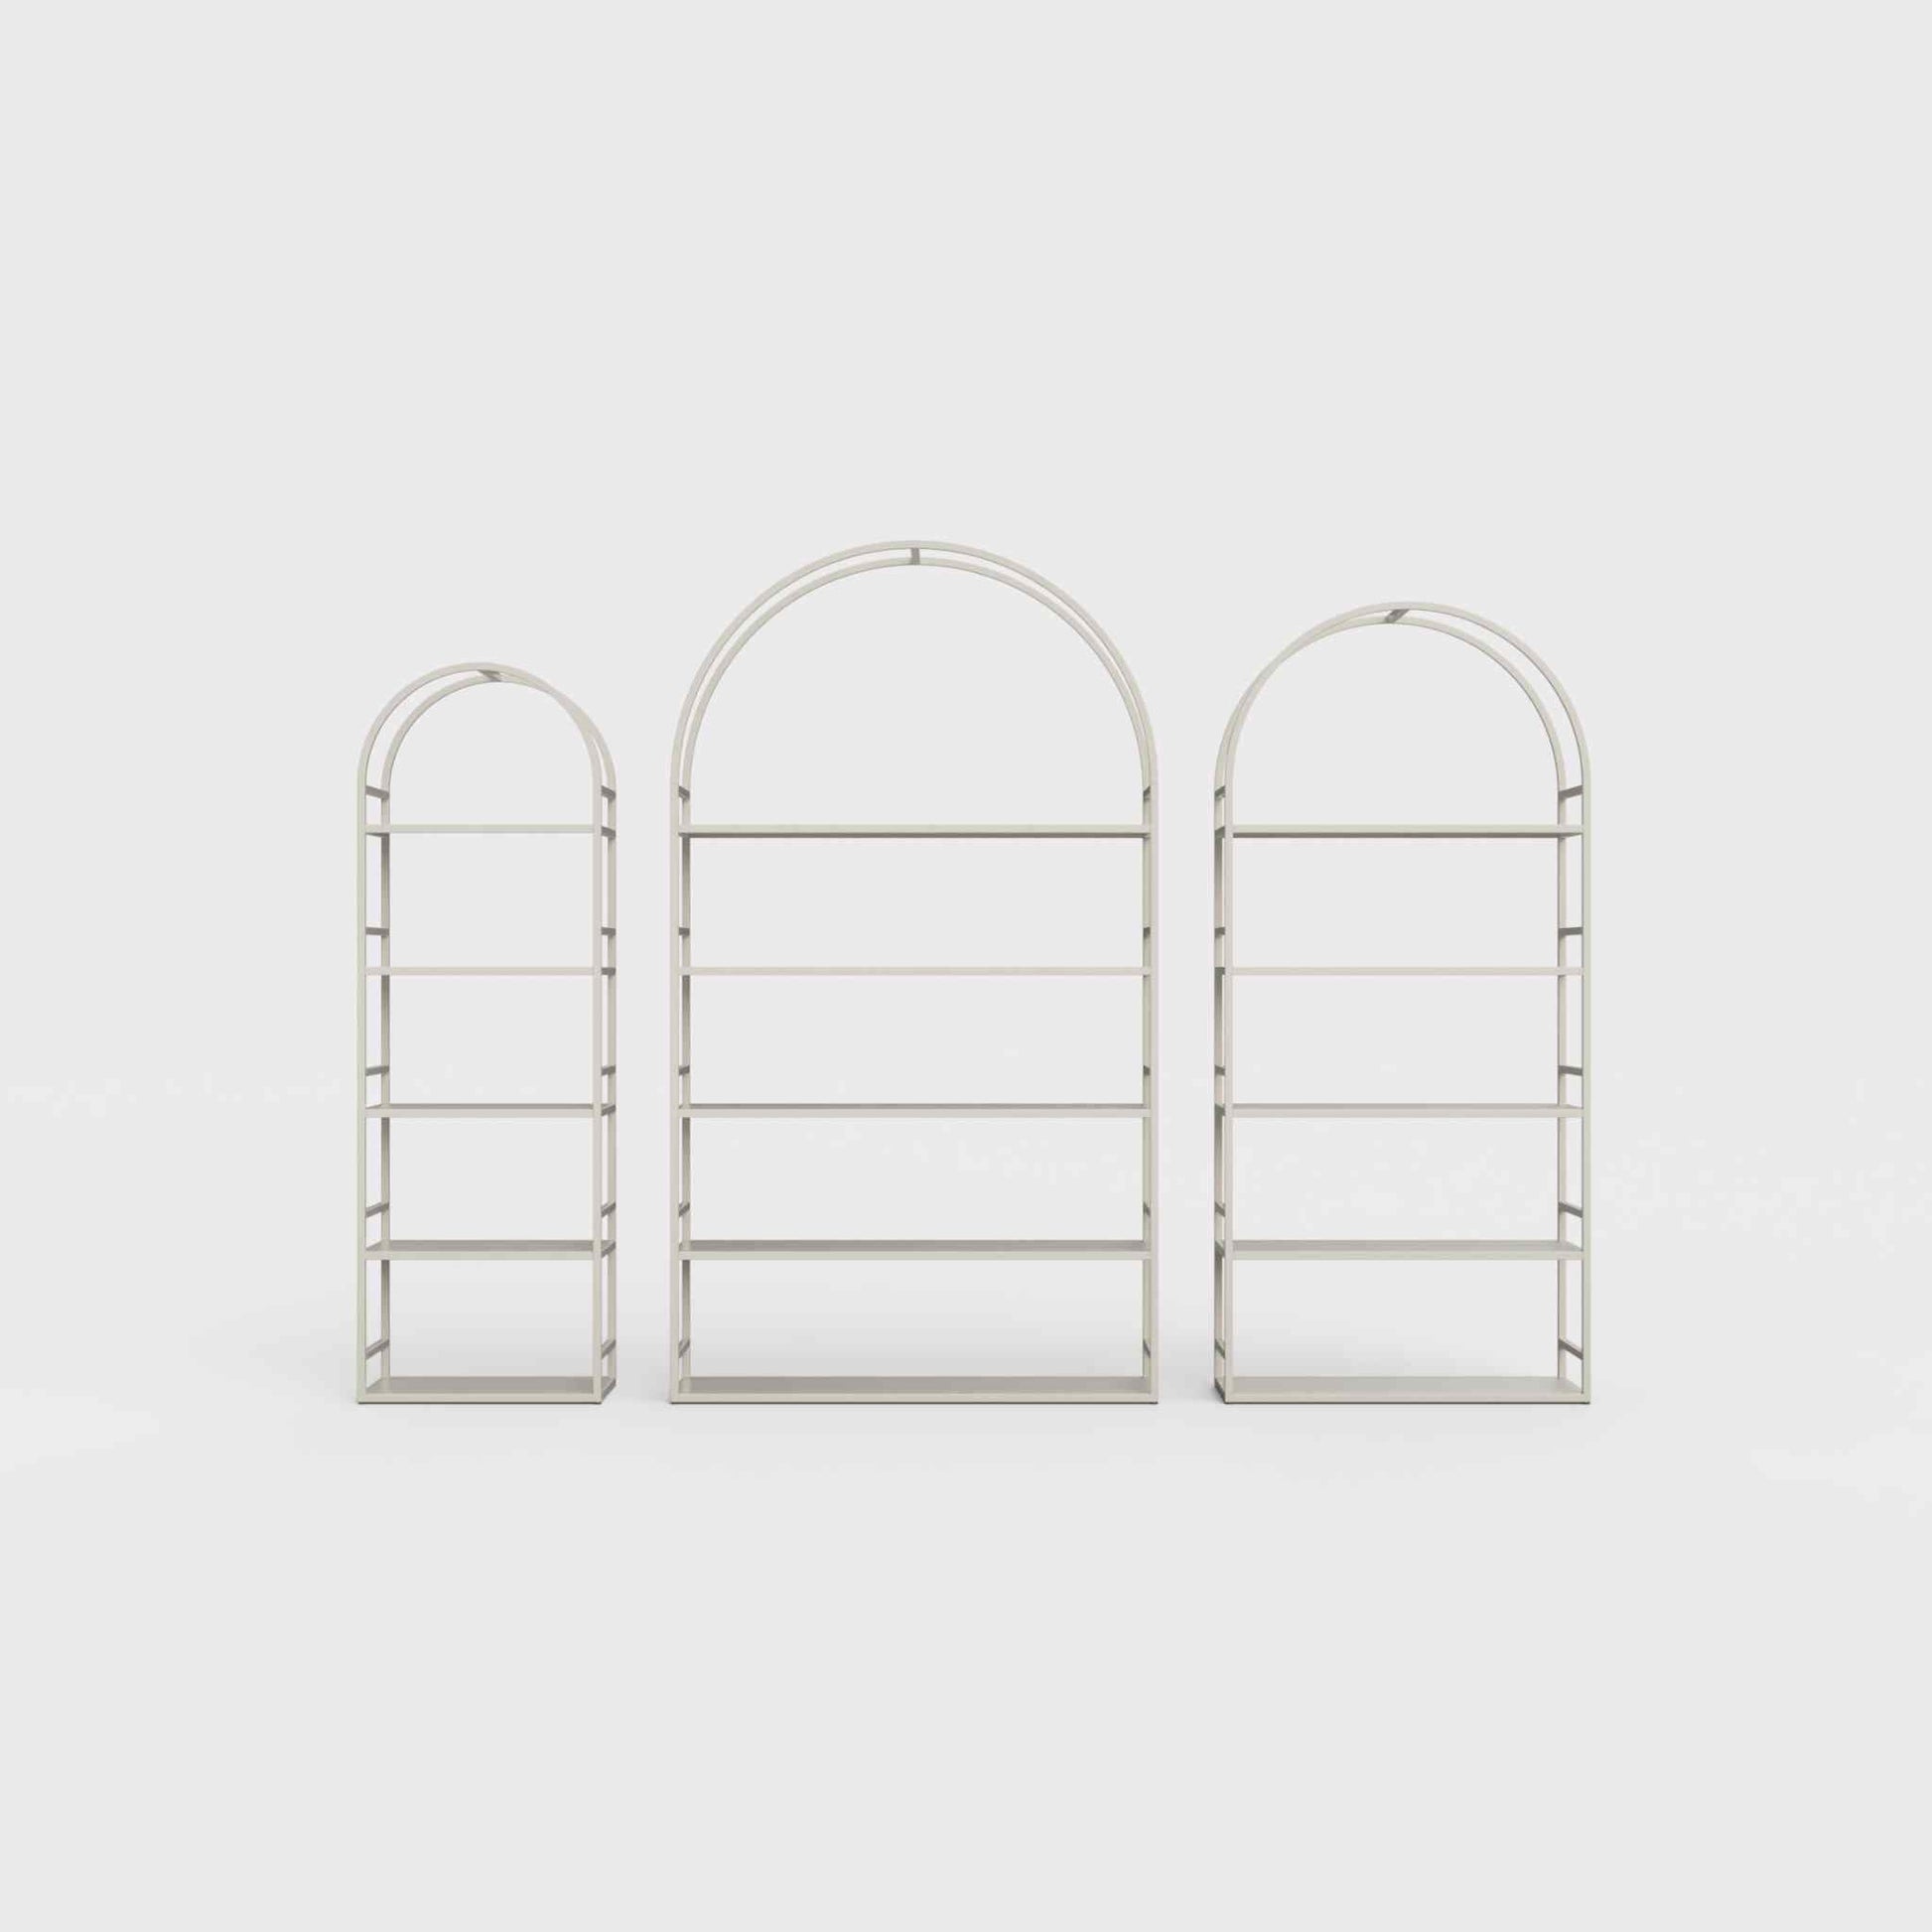 Arched bookcase Arkada, available in Switzerland through ÉTAUDORÉ, made from highest quality powdered coated steel in light beige